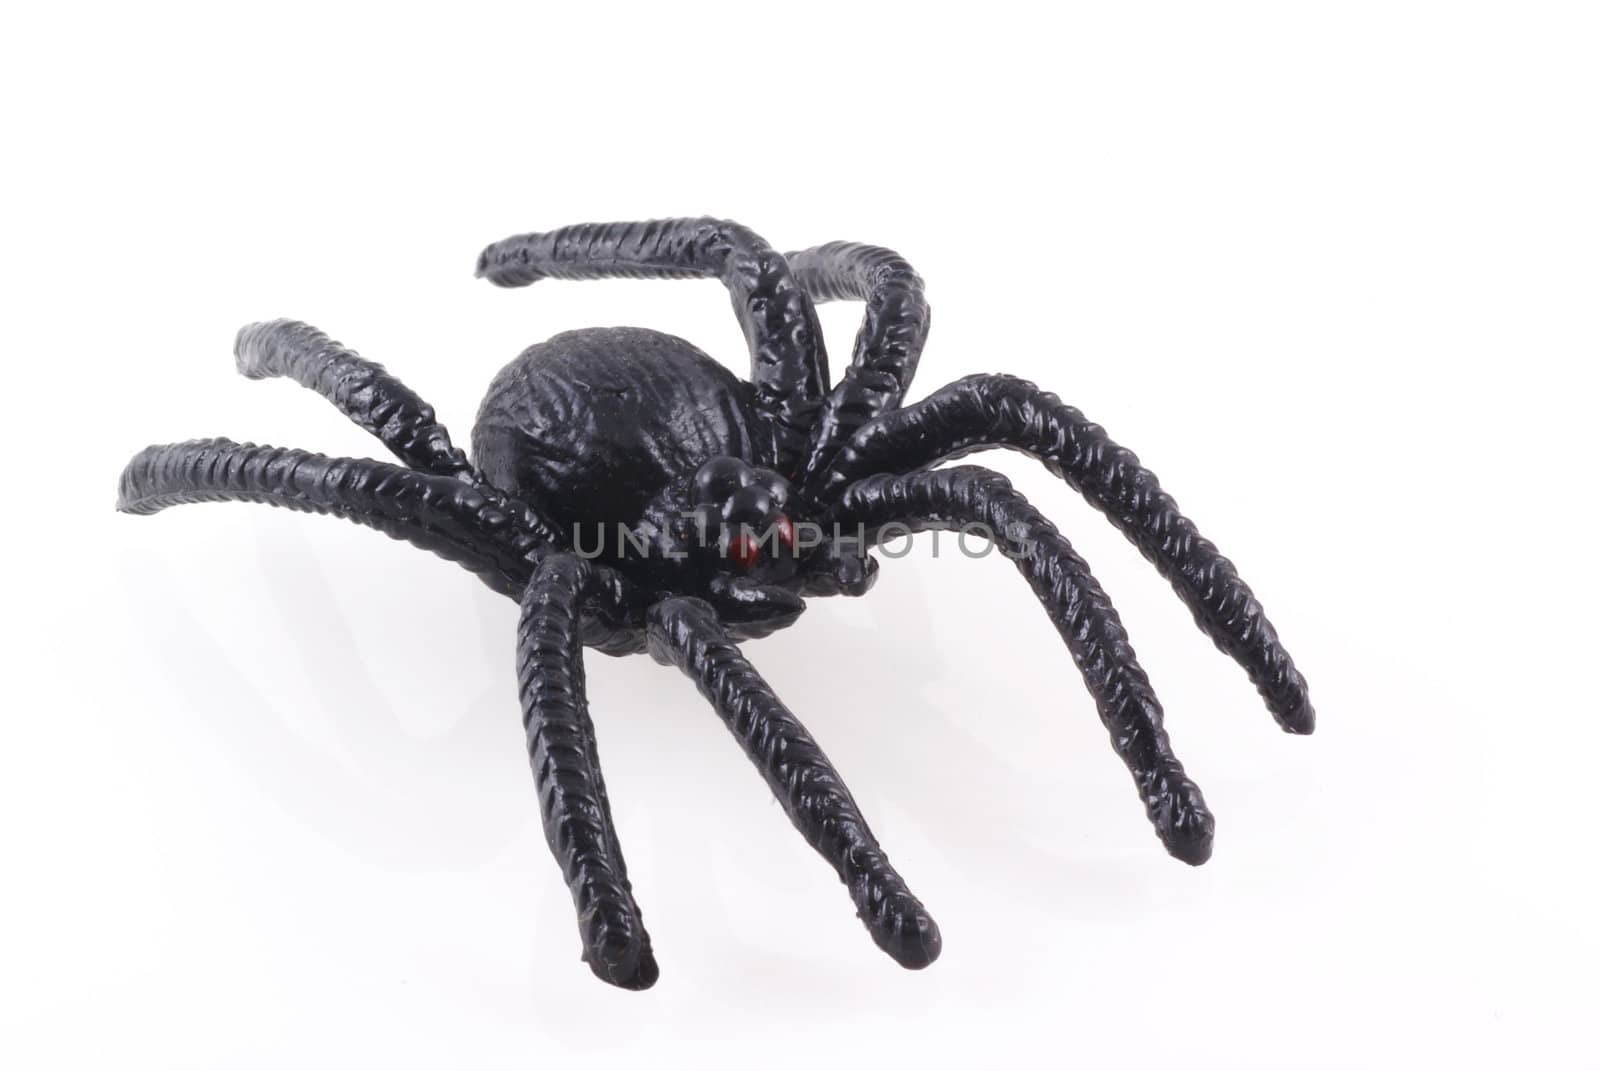 Big black toy spider isolated on a white background.